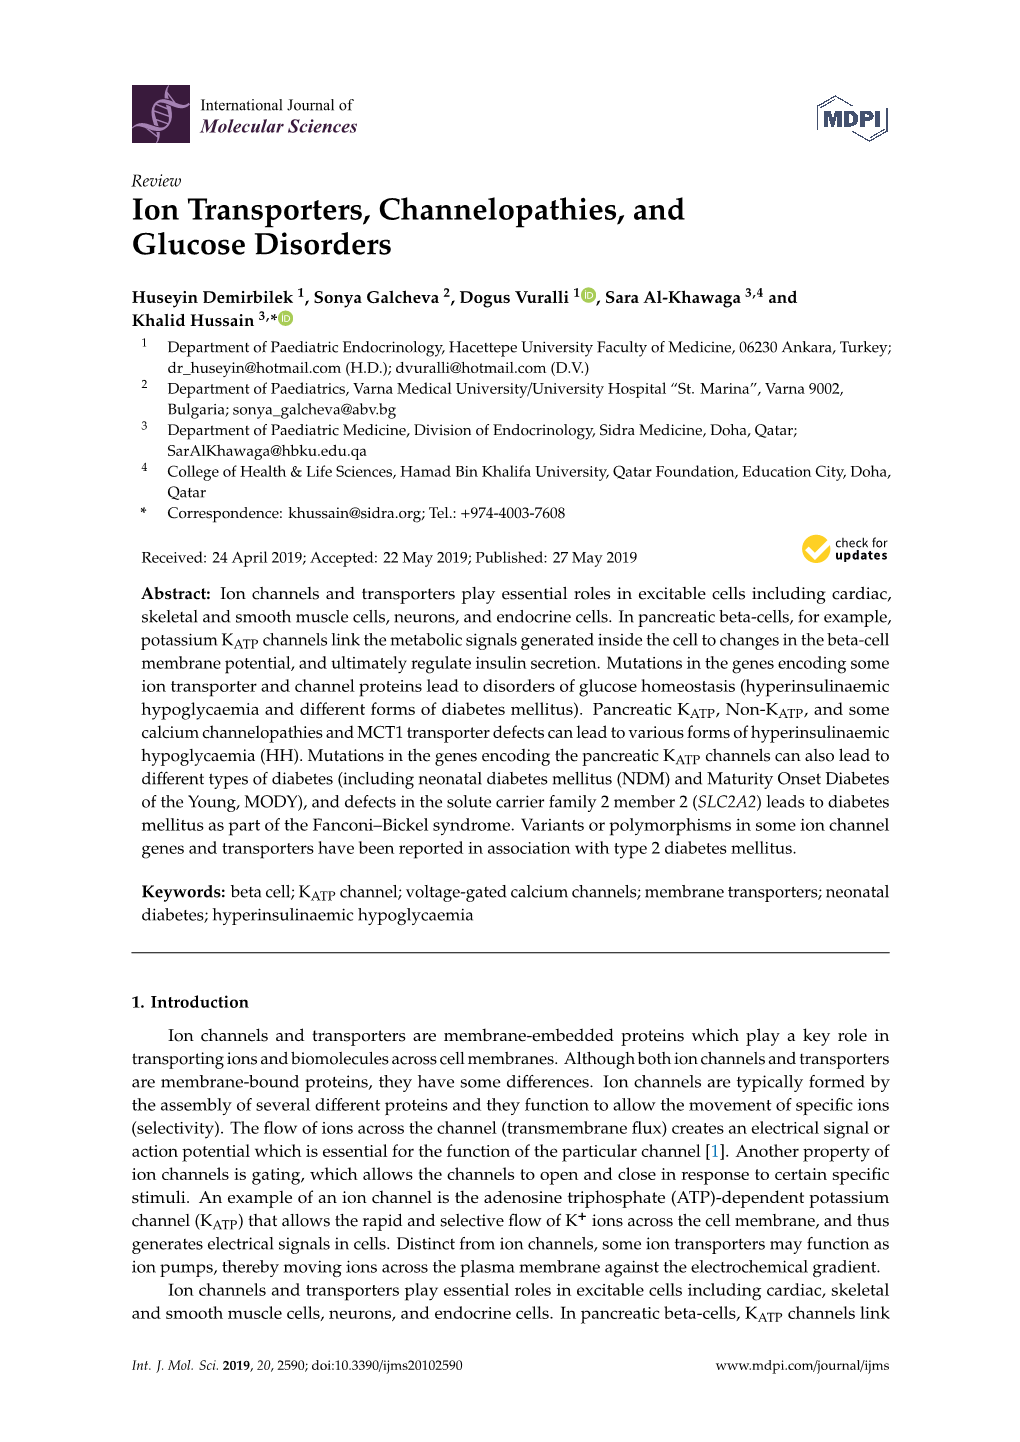 Ion Transporters, Channelopathies, and Glucose Disorders